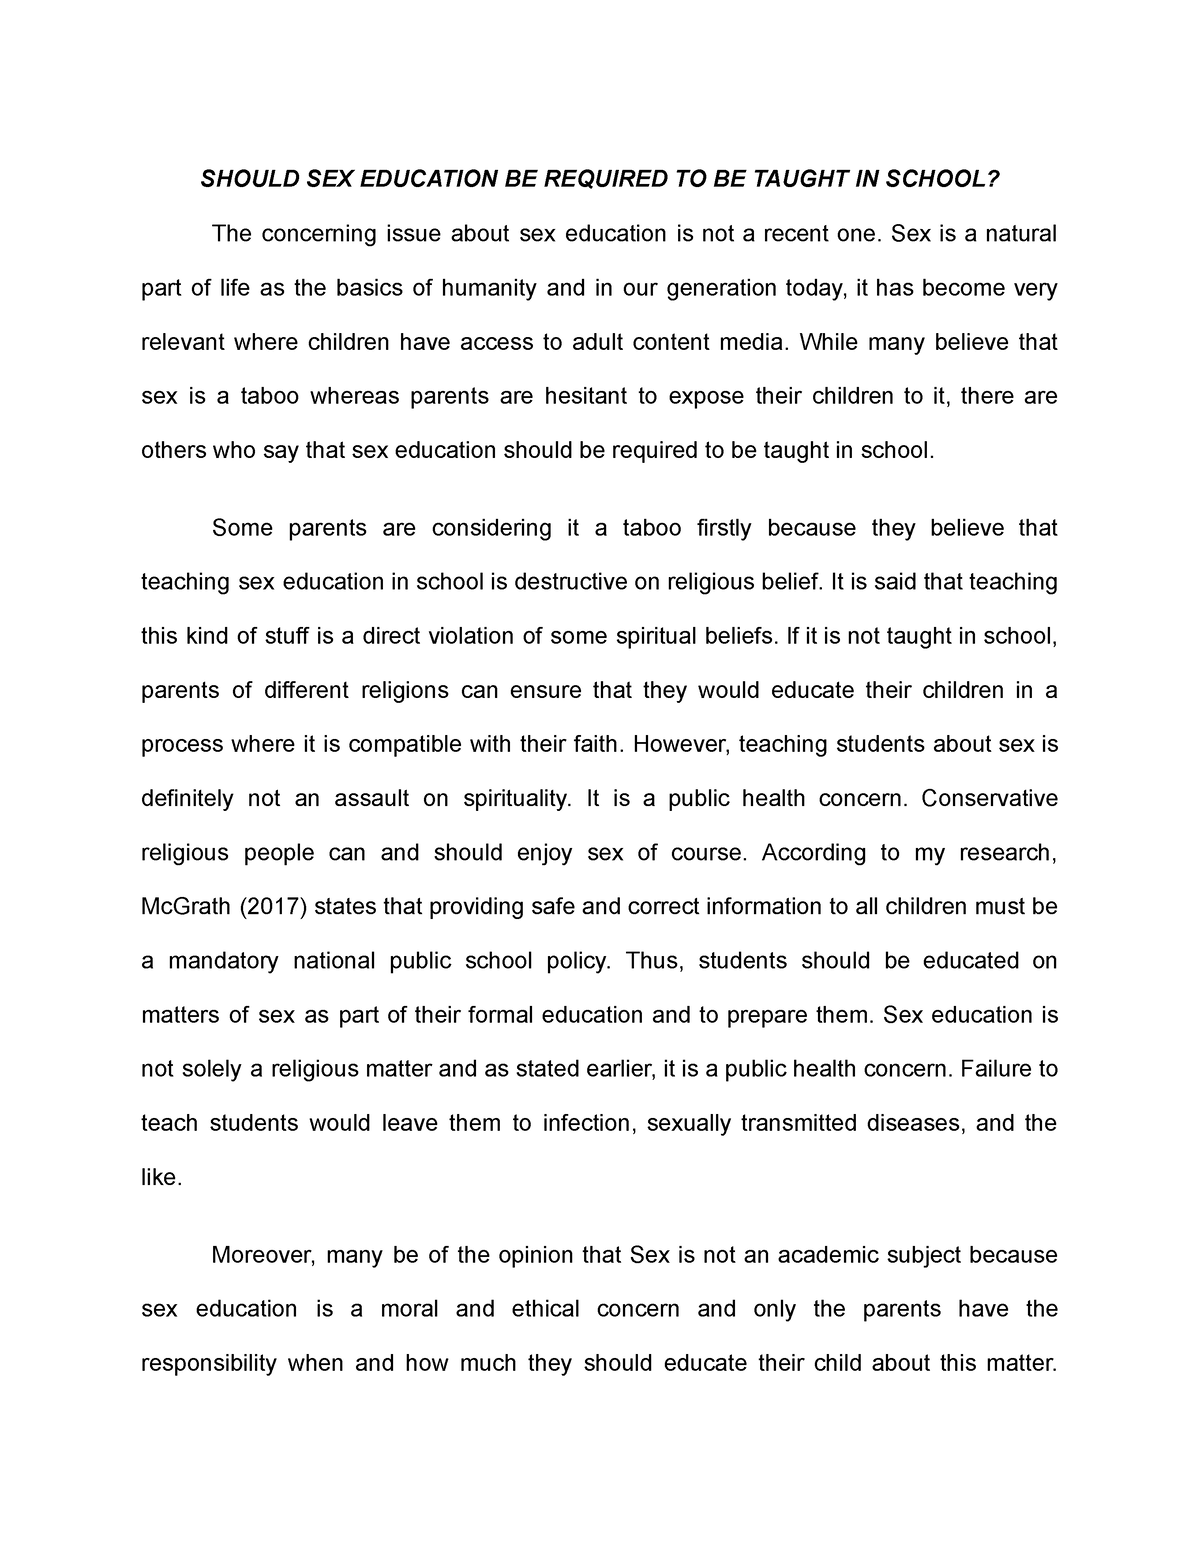 Argumentative Essay This Assignment Talks About The Concerning Issue About Sex Education Is